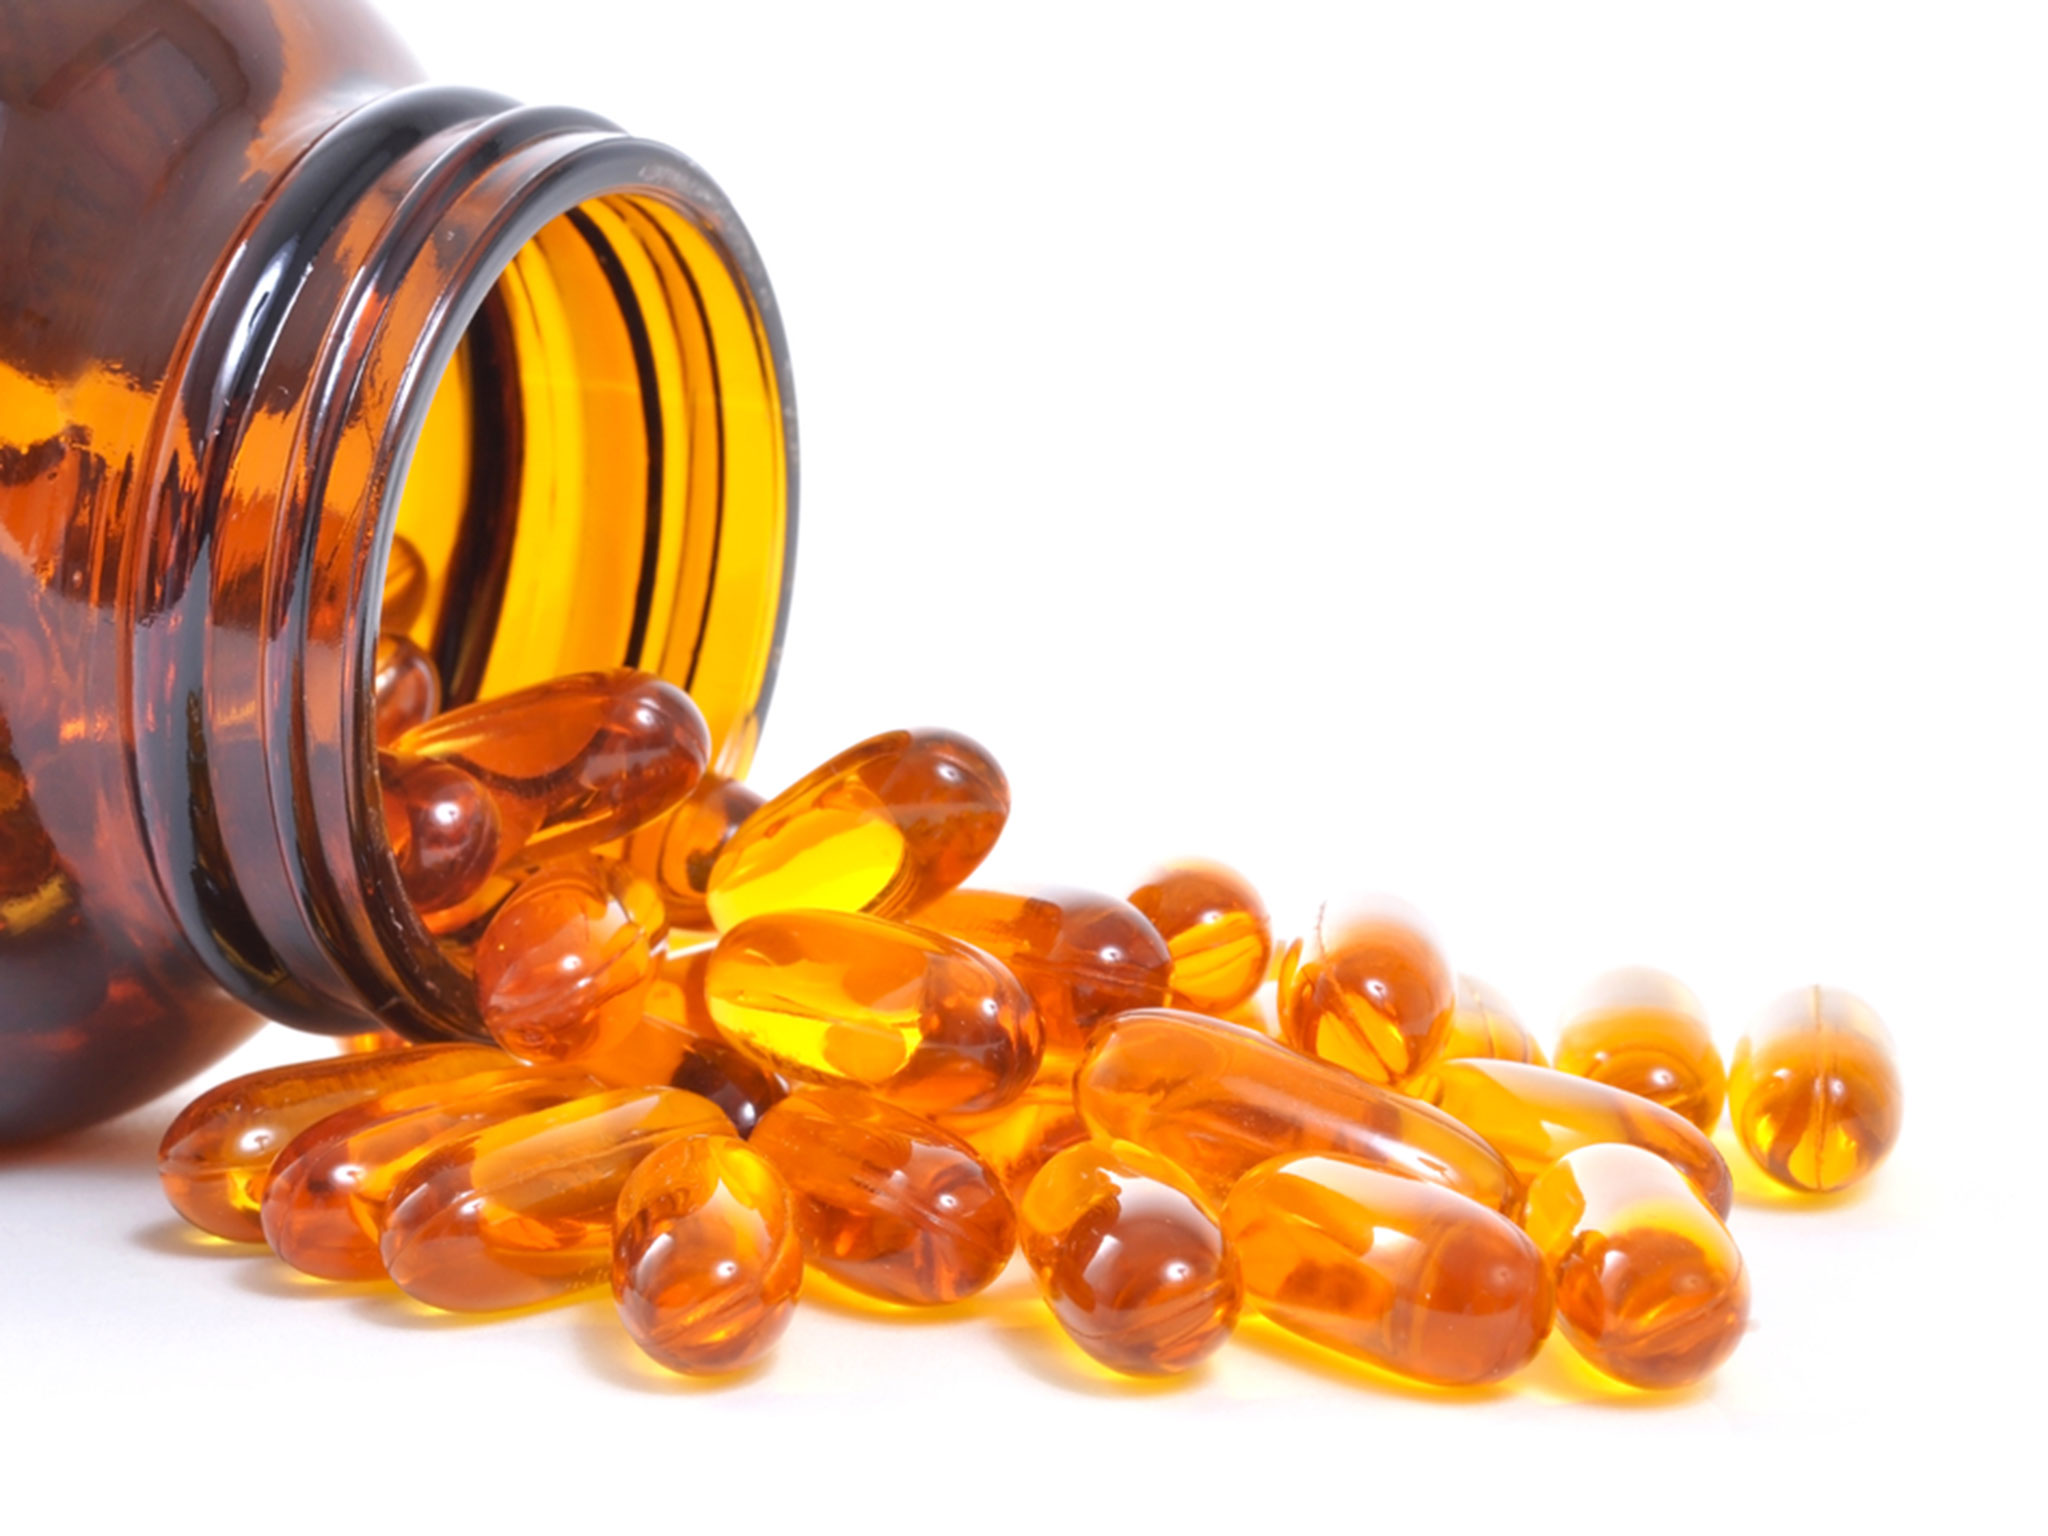 Vitamin D Deficiency Linked To Cardiovascular Disease The